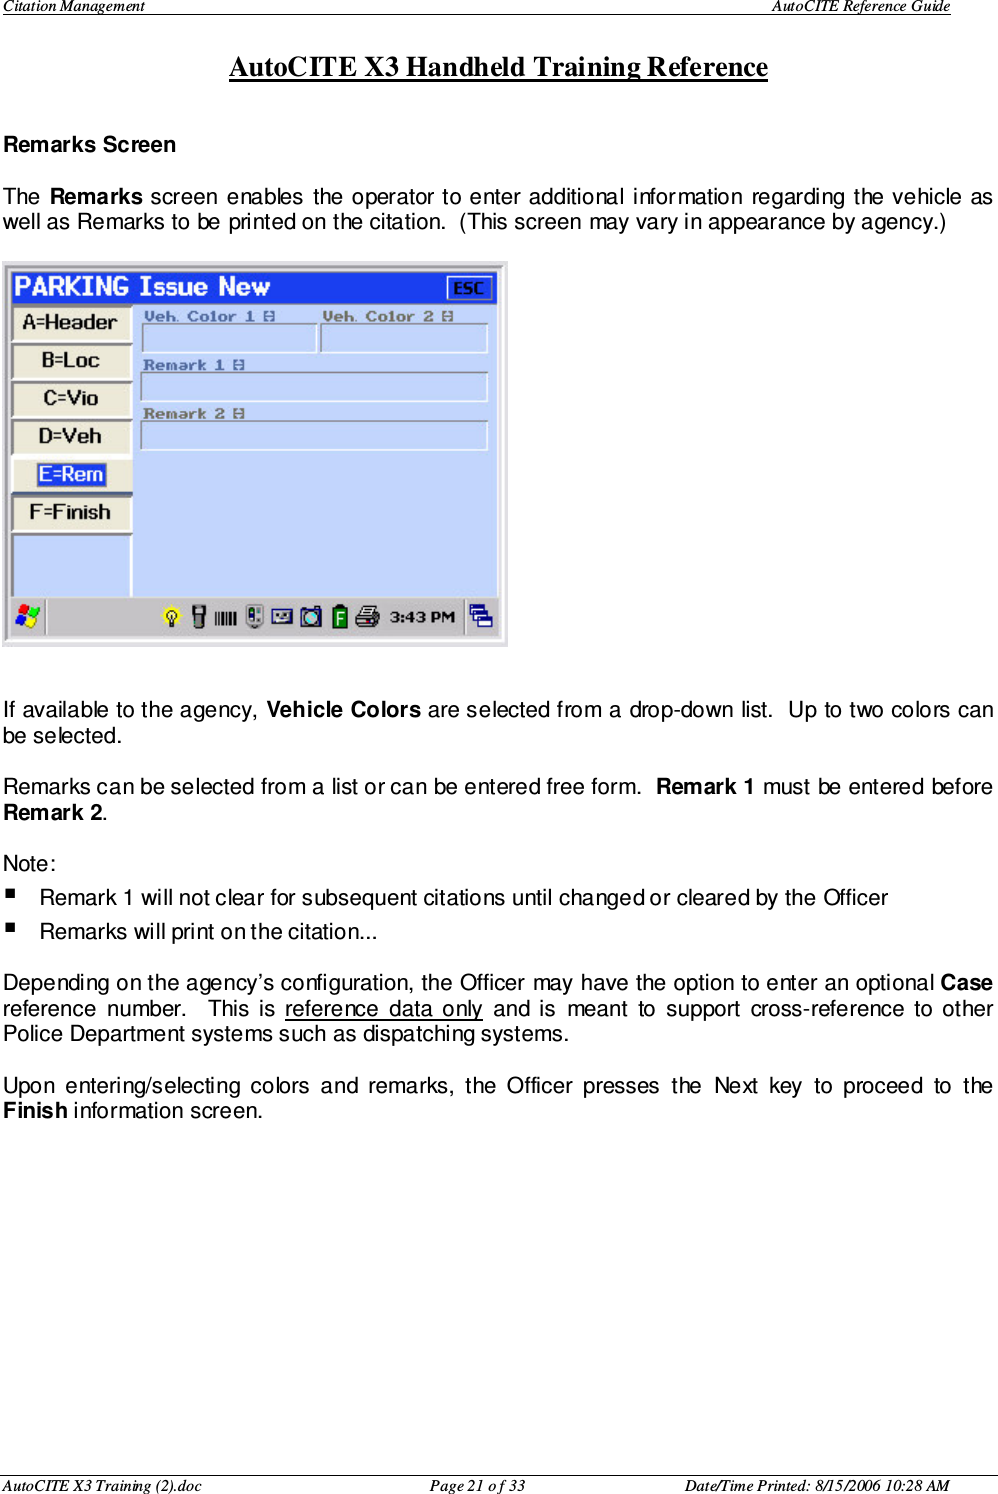 Citation Management    AutoCITE Reference Guide  AutoCITE X3 Handheld Training Reference AutoCITE X3 Training (2).doc  Page 21 o f 33  Date/Time Printed: 8/15/2006 10:28 AM Remarks Screen   The  Remarks screen  enables the operator to enter additional information  regarding the vehicle as well as Remarks to be printed on the citation.  (This screen may vary in appearance by agency.)     If available to the agency, Vehicle Colors are selected from a drop-down list.  Up to two colors can be selected.  Remarks can be selected from a list or can be entered free form.  Remark 1 must be entered before Remark 2.    Note:   Remark 1 will not clear for subsequent citations until changed or cleared by the Officer Remarks will print on the citation...  Depending on the agency’s configuration, the Officer may have the option to enter an optional Case reference  number.    This  is  reference  data  only  and  is  meant  to  support  cross-reference  to  other Police Department systems such as dispatching systems.  Upon  entering/selecting  colors  and  remarks,  the  Officer  presses  the  Next  key  to  proceed  to  the Finish information screen.  